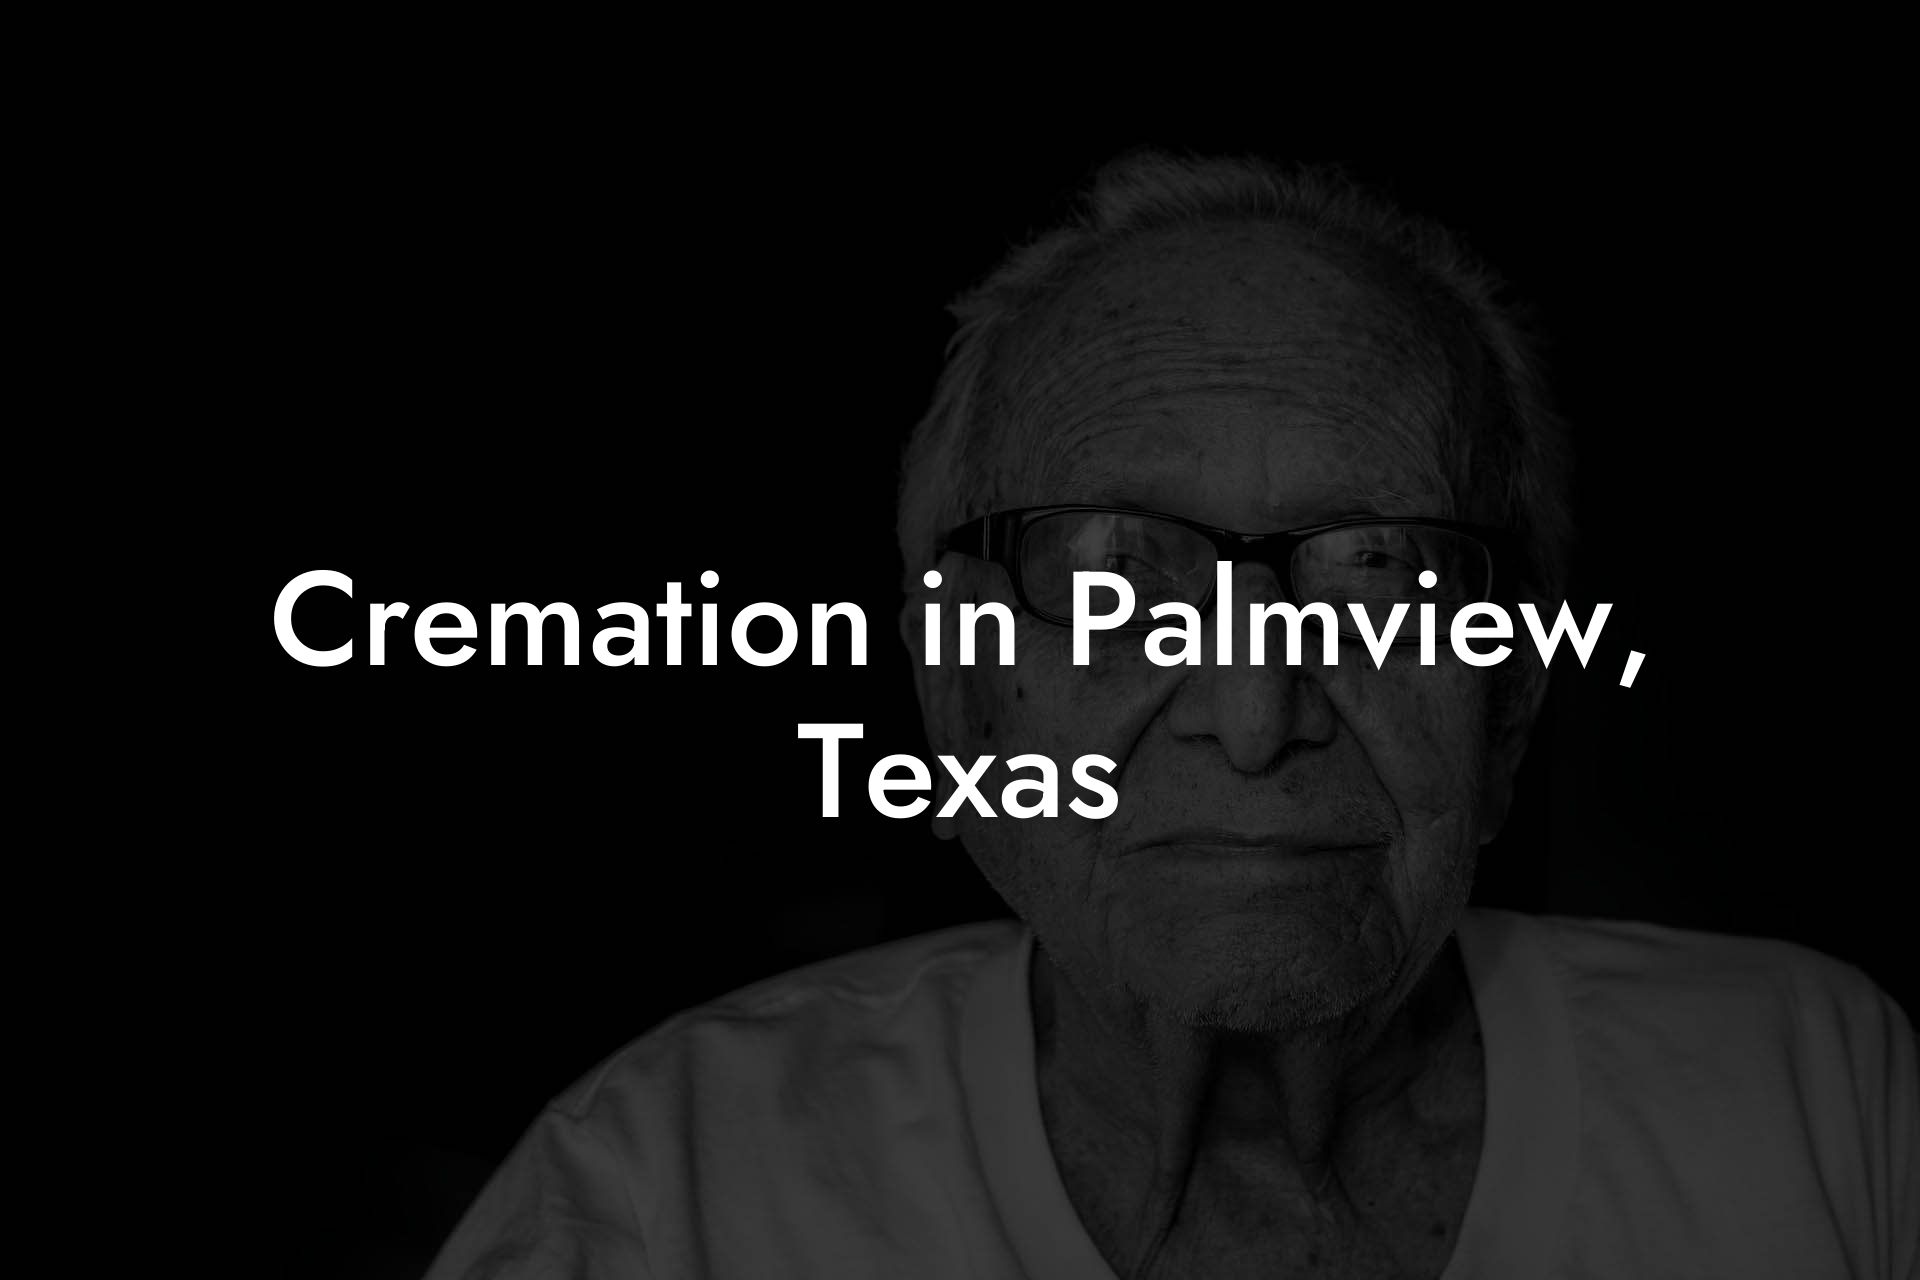 Cremation in Palmview, Texas